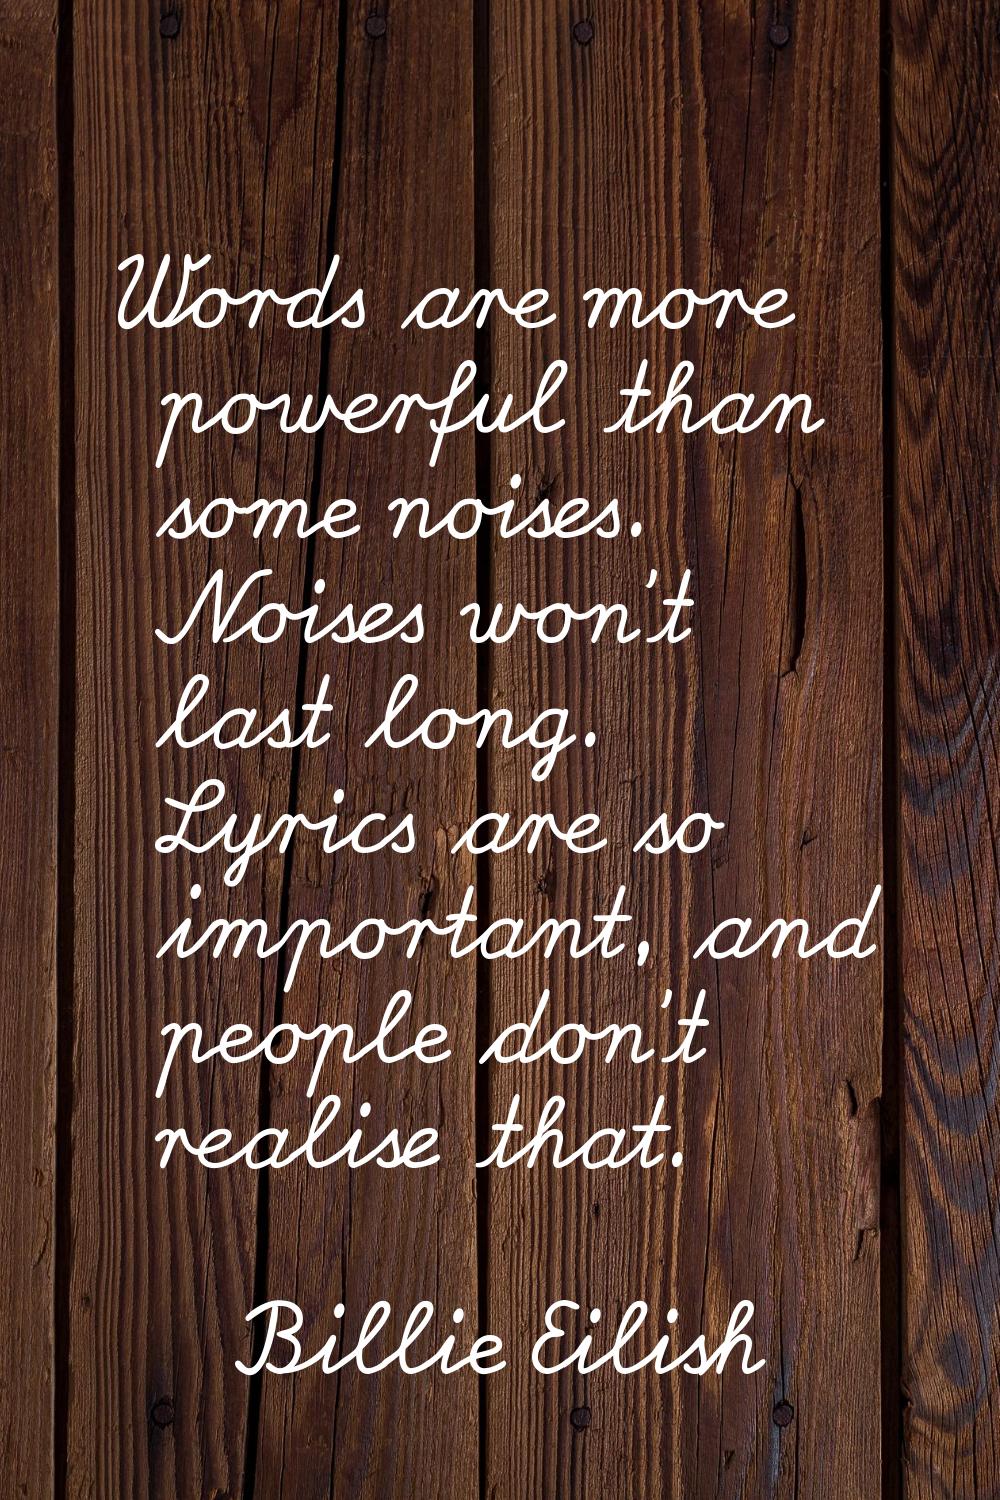 Words are more powerful than some noises. Noises won't last long. Lyrics are so important, and peop